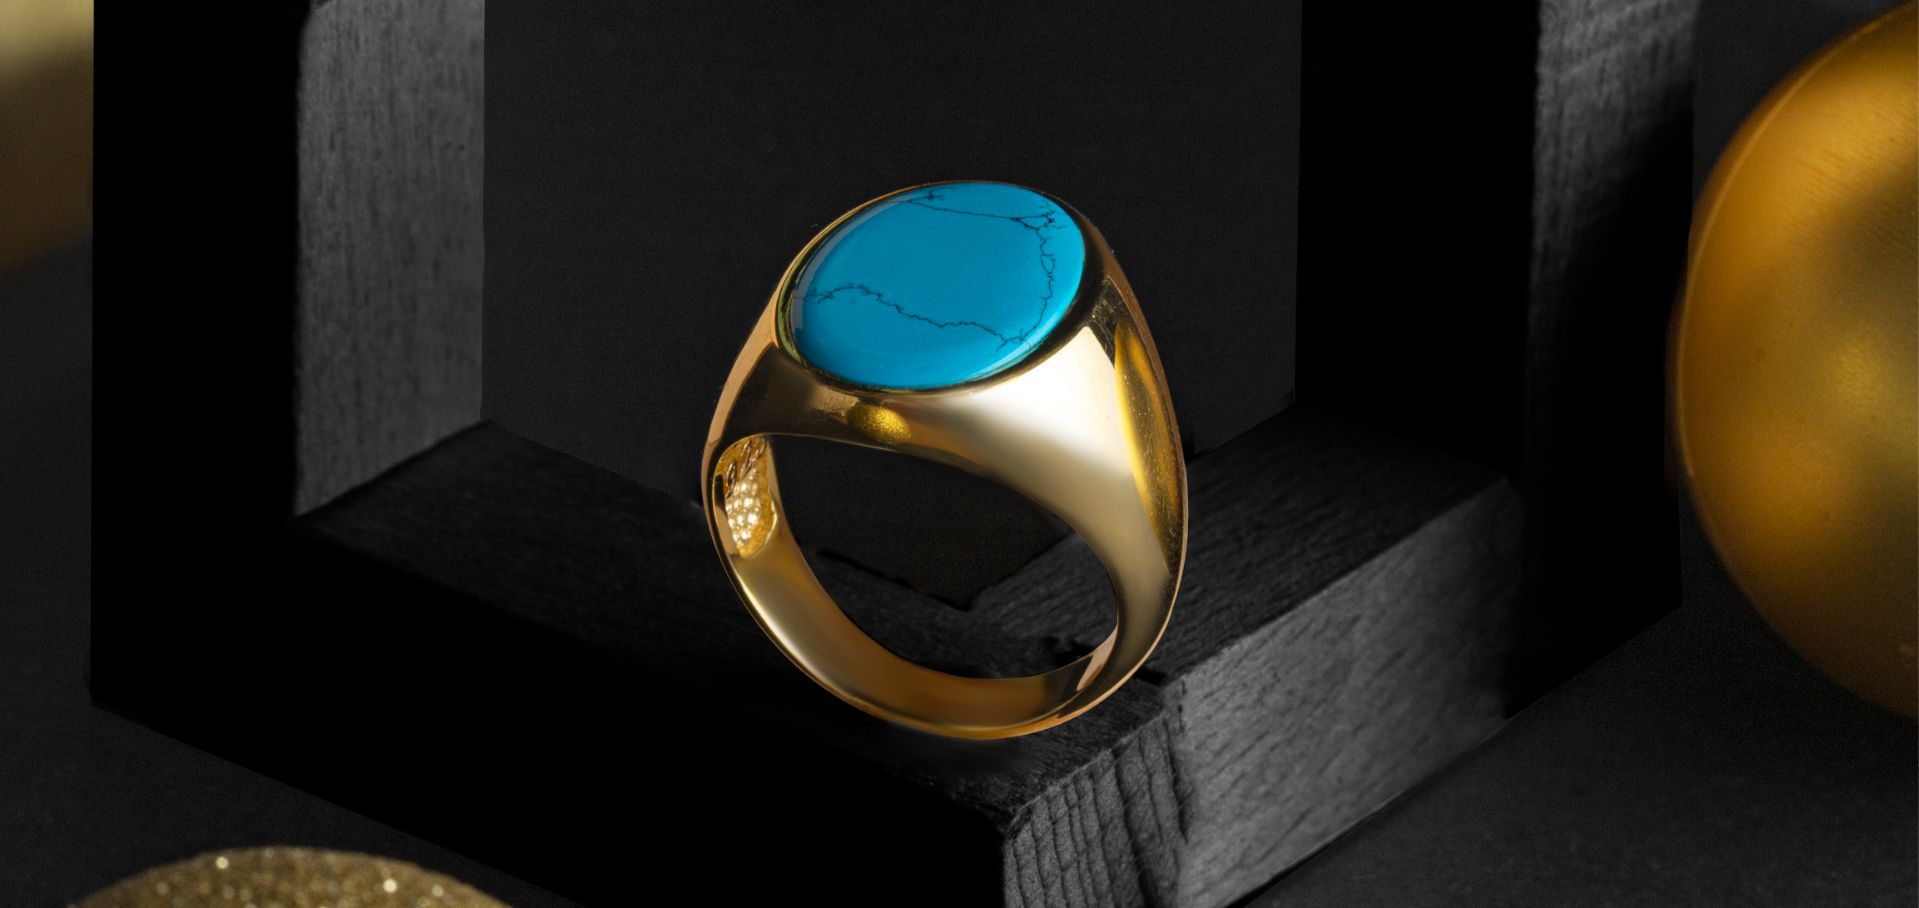 Men's Silver Turquoise Rings: Everything You Need to Know About Turquoise Stone and Accessories